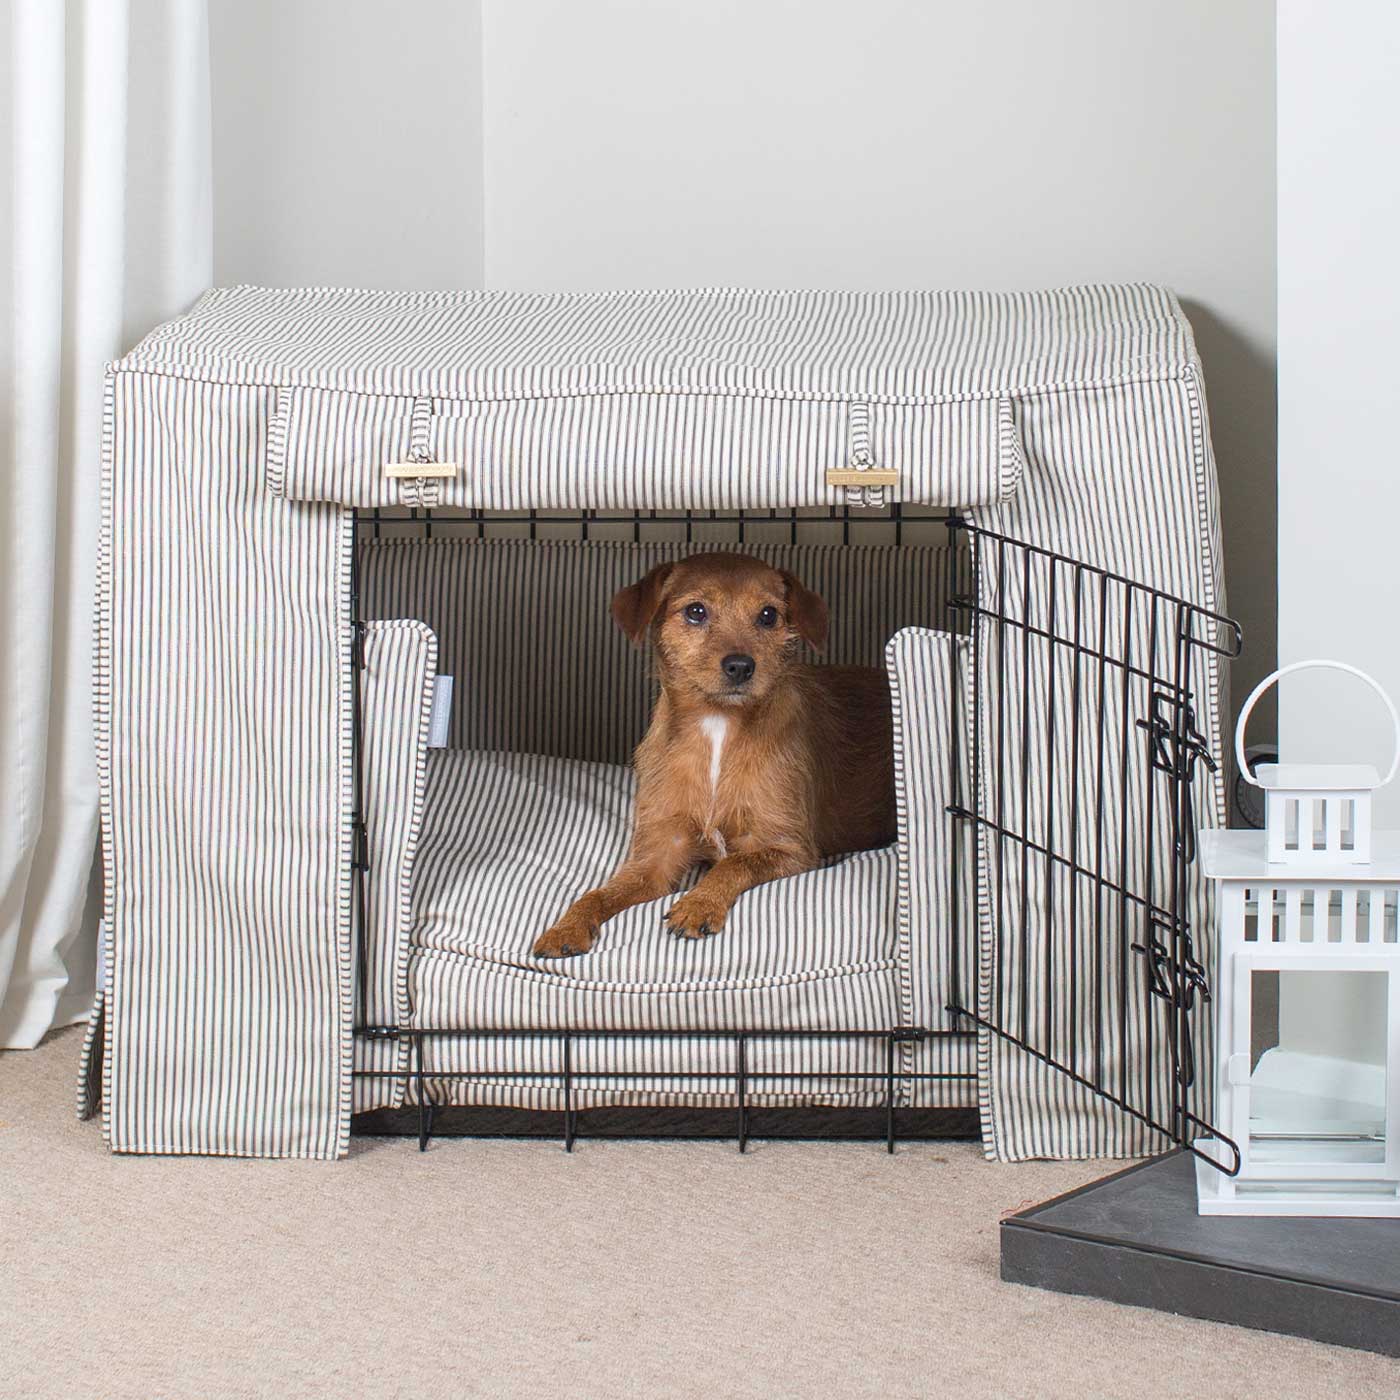 Luxury Heavy Duty Dog Crate, In Stunning Regency Stripe Crate Set, The Perfect Dog Crate Set For Building The Ultimate Pet Den! Dog Crate Cover Available To Personalise at Lords & Labradors